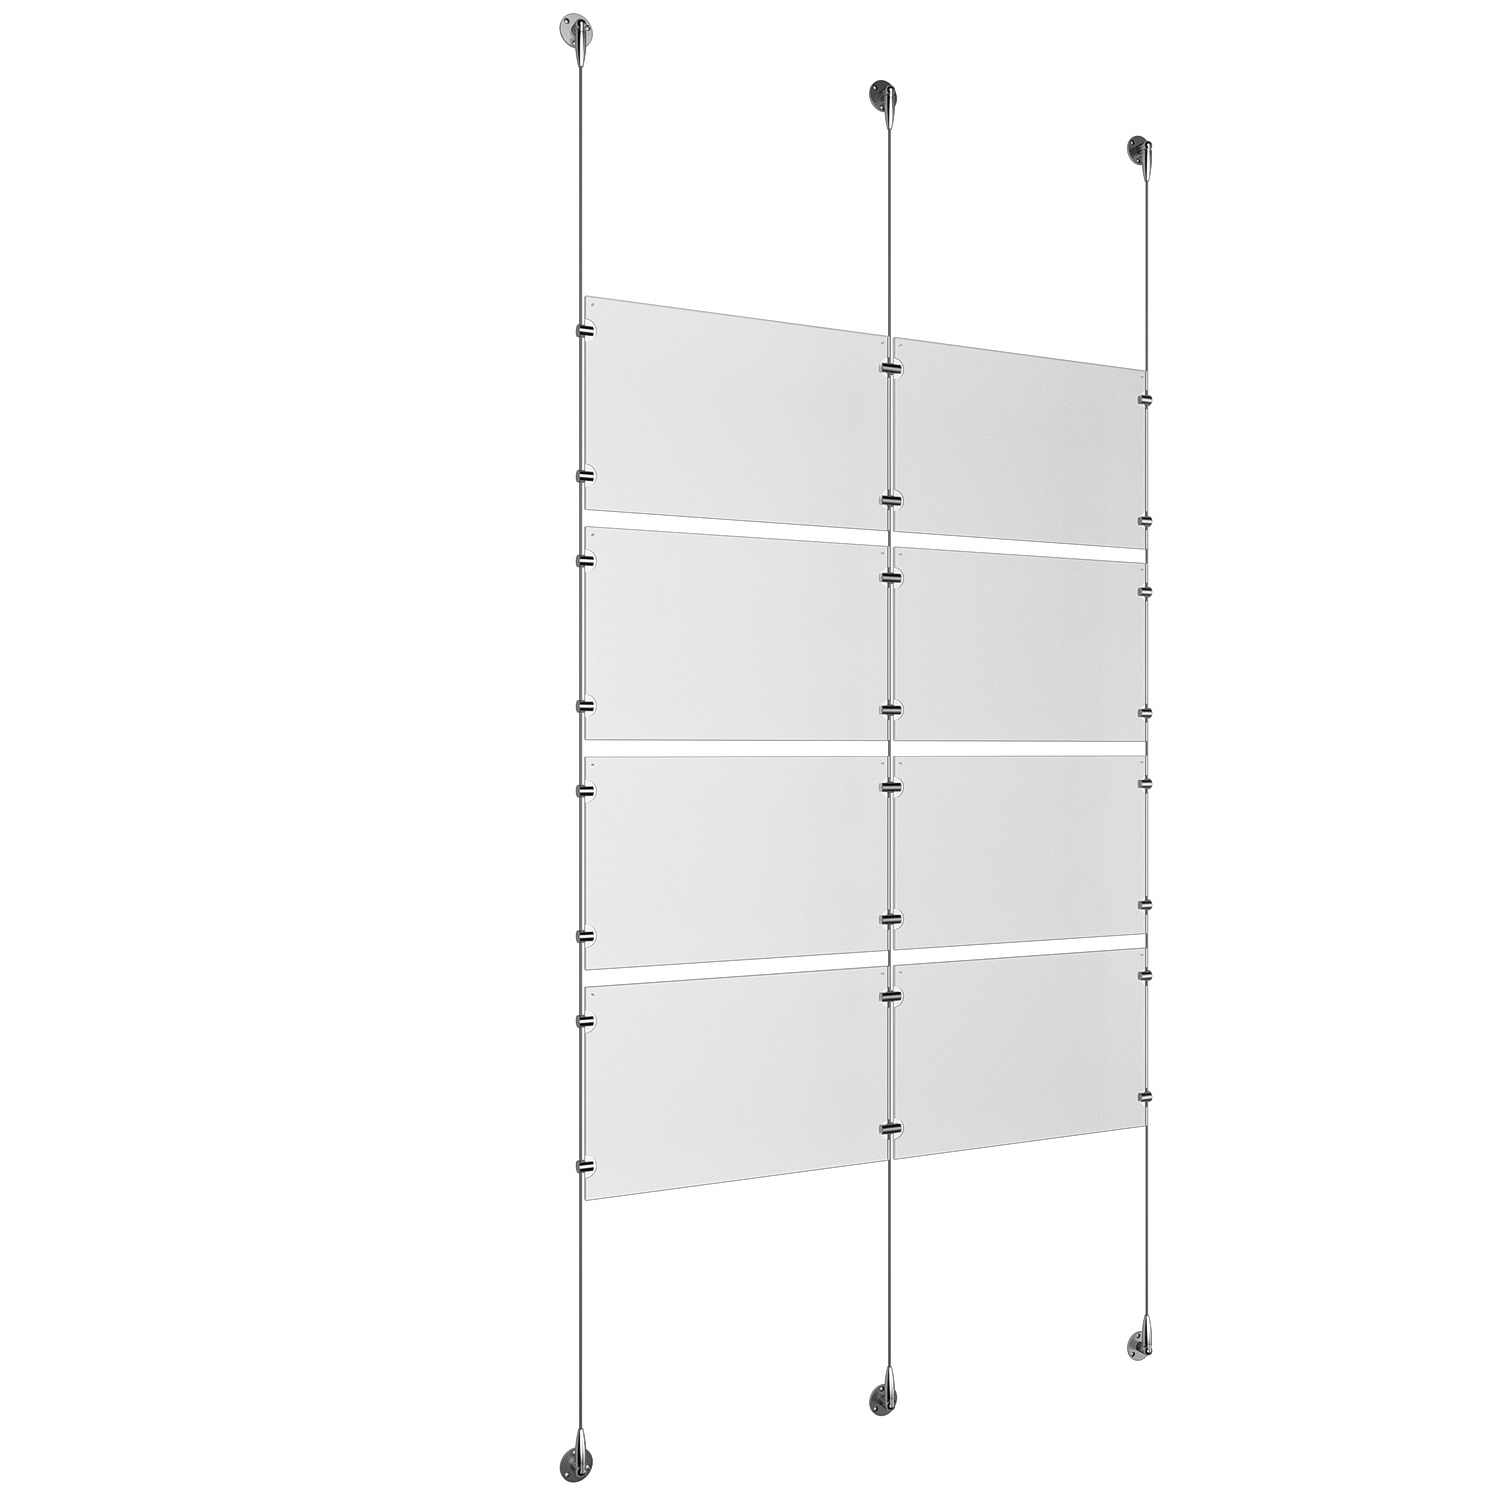 (8) 17'' Width x 11'' Height Clear Acrylic Frame & (3) Stainless Steel Satin Brushed Adjustable Angle Signature 1/8'' Cable Systems with (16) Single-Sided Panel Grippers (8) Double-Sided Panel Grippers